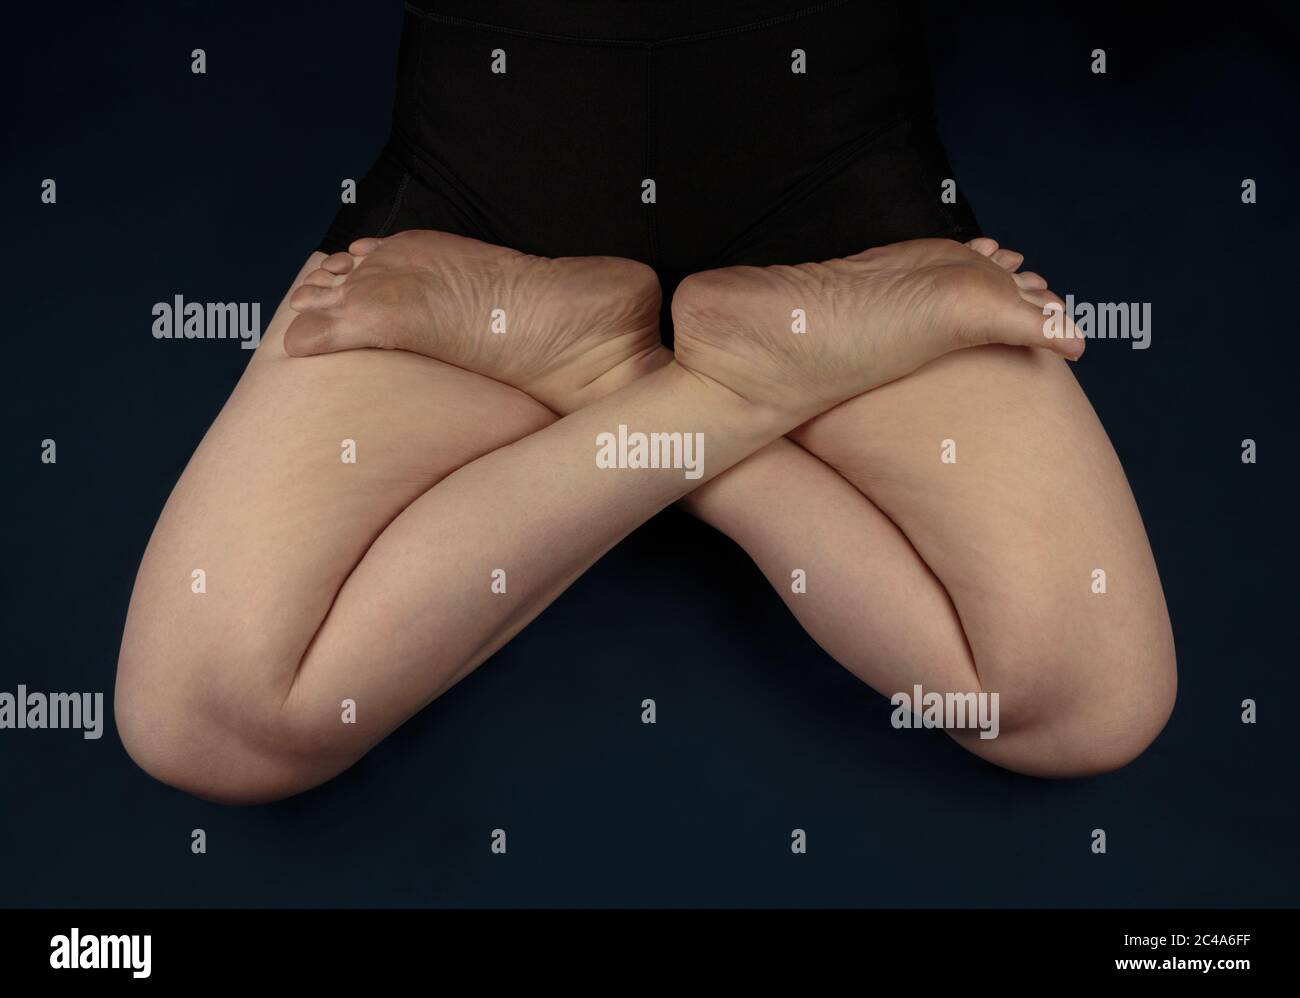 https://c8.alamy.com/comp/2C4A6FF/a-womans-bare-legs-in-the-lotus-yoga-pose-or-padmasana-shot-from-above-on-a-dark-blue-background-2C4A6FF.jpg